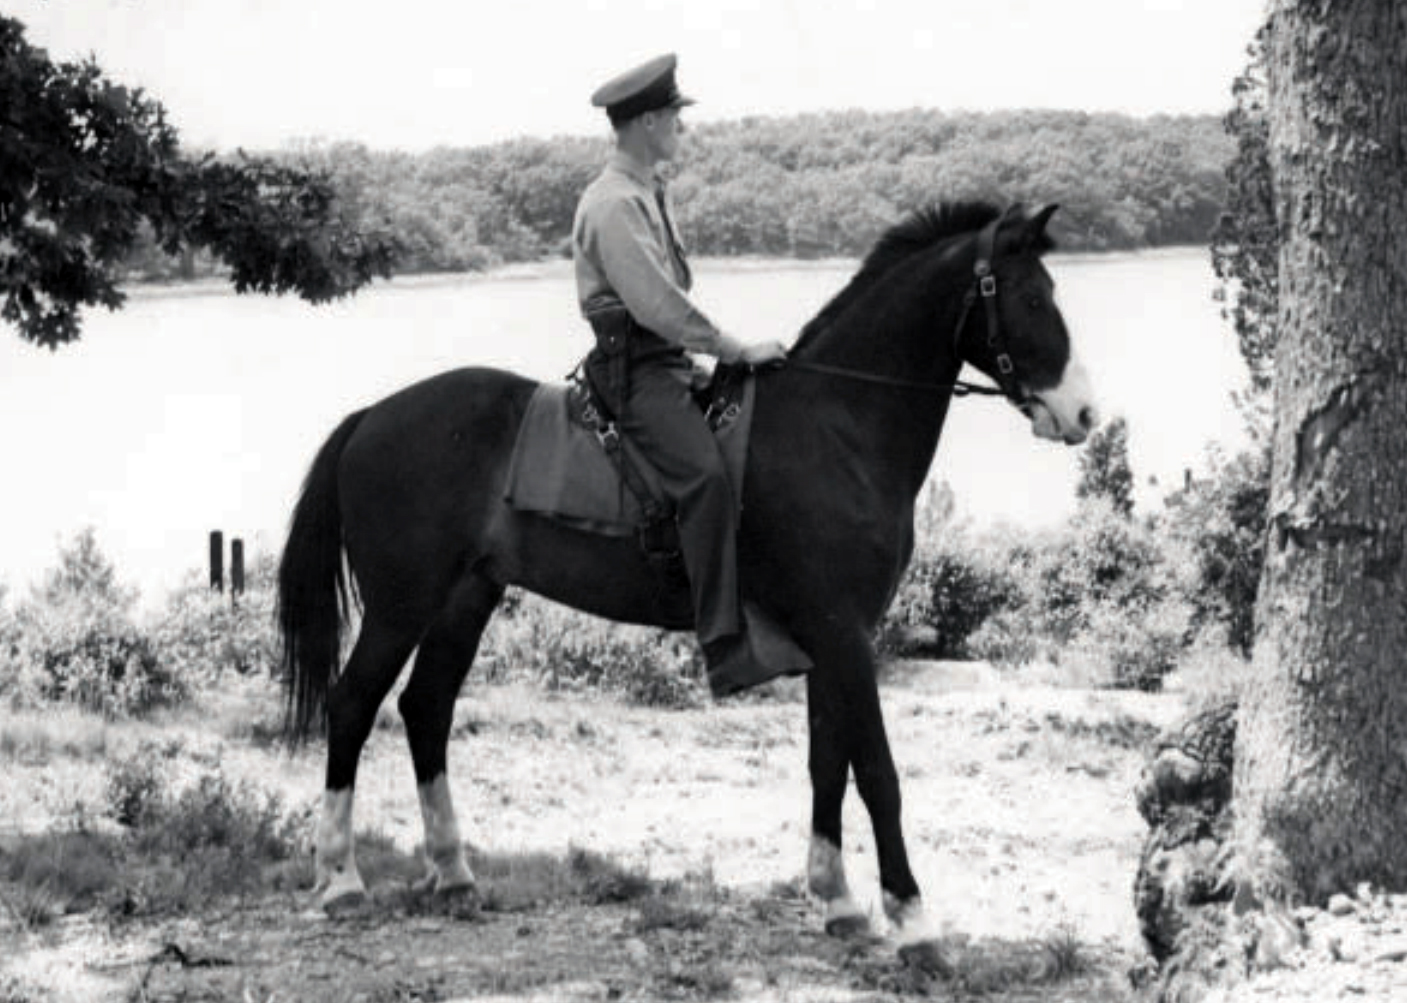 Harlan Jeffery on patrol at Naval Ammunition Depot, Hingham, MA in 1940. Photo appeared in the July, 2009 Leatherneck magazine.